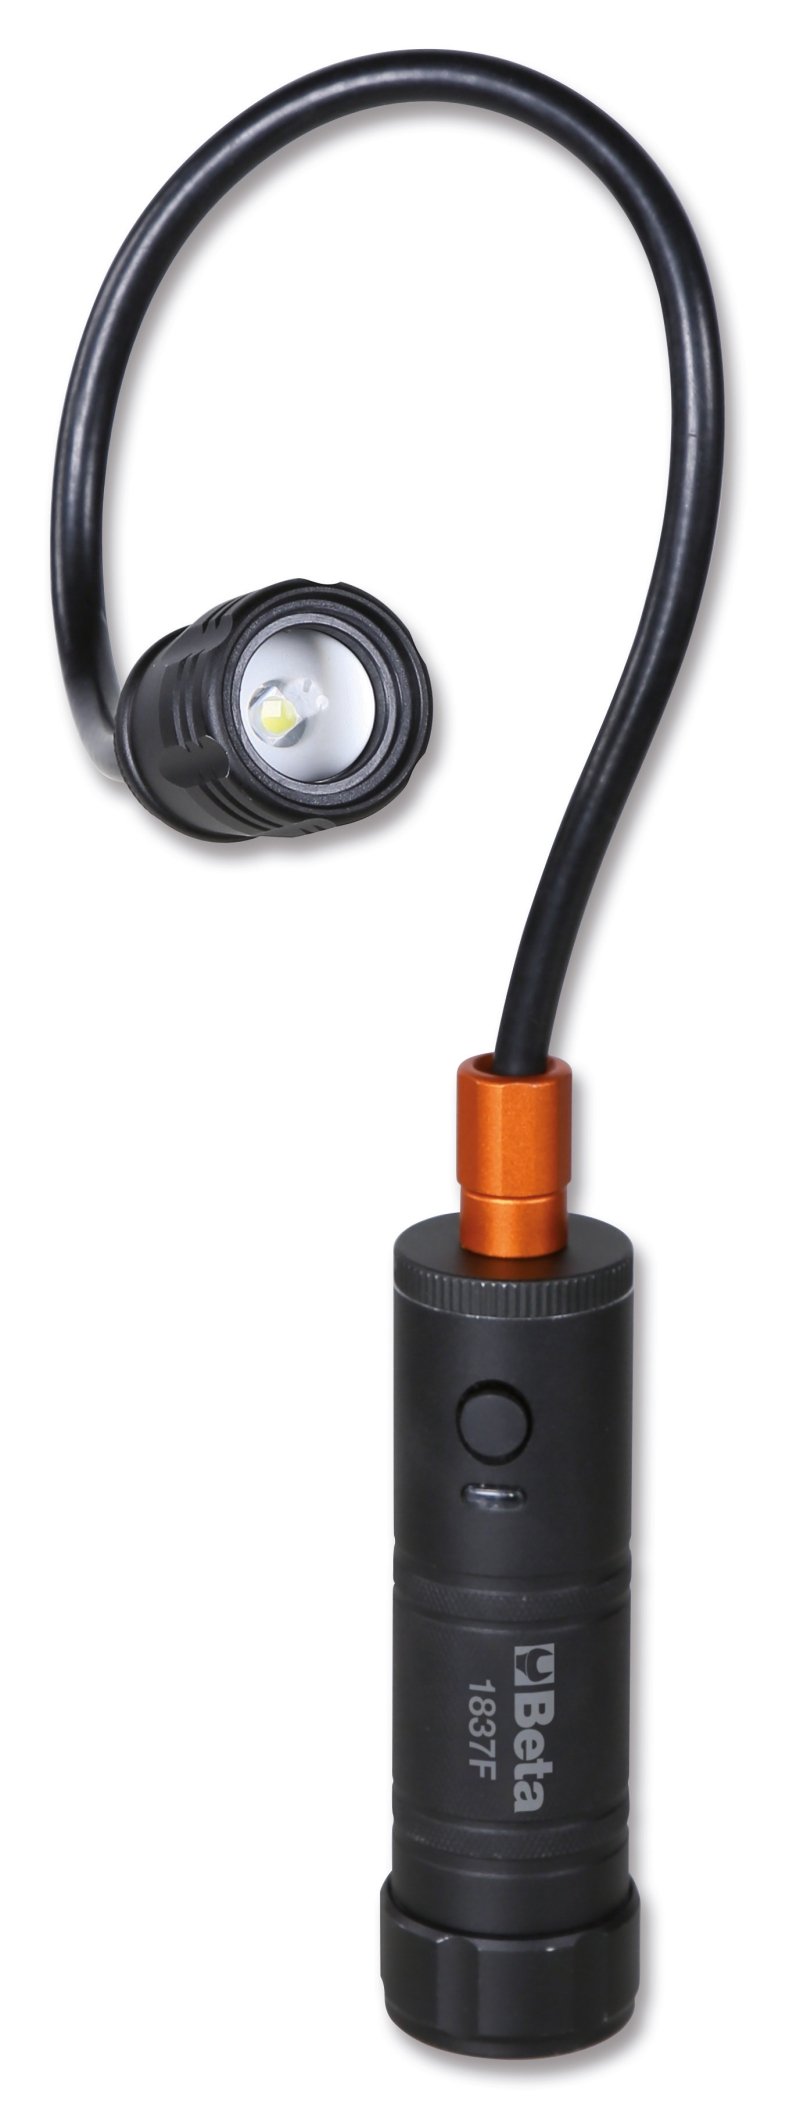 1837F - Magnetic, articulated lamp with high-brightness LEDs, made of sturdy anodized aluminium, up to 500 lumens